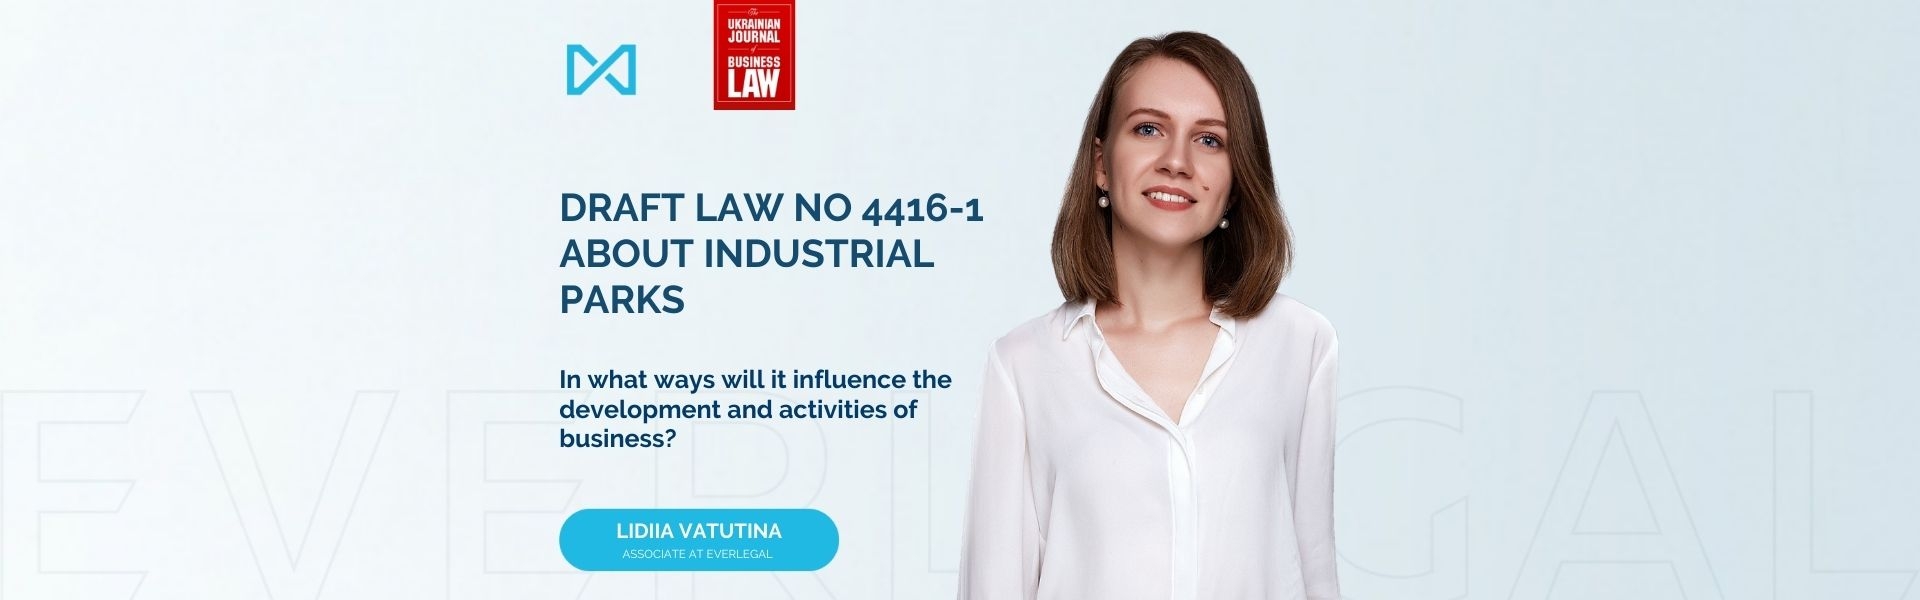 Draft Law No 4416-1 about industrial parks: in what ways will it influence the development and activities of business?